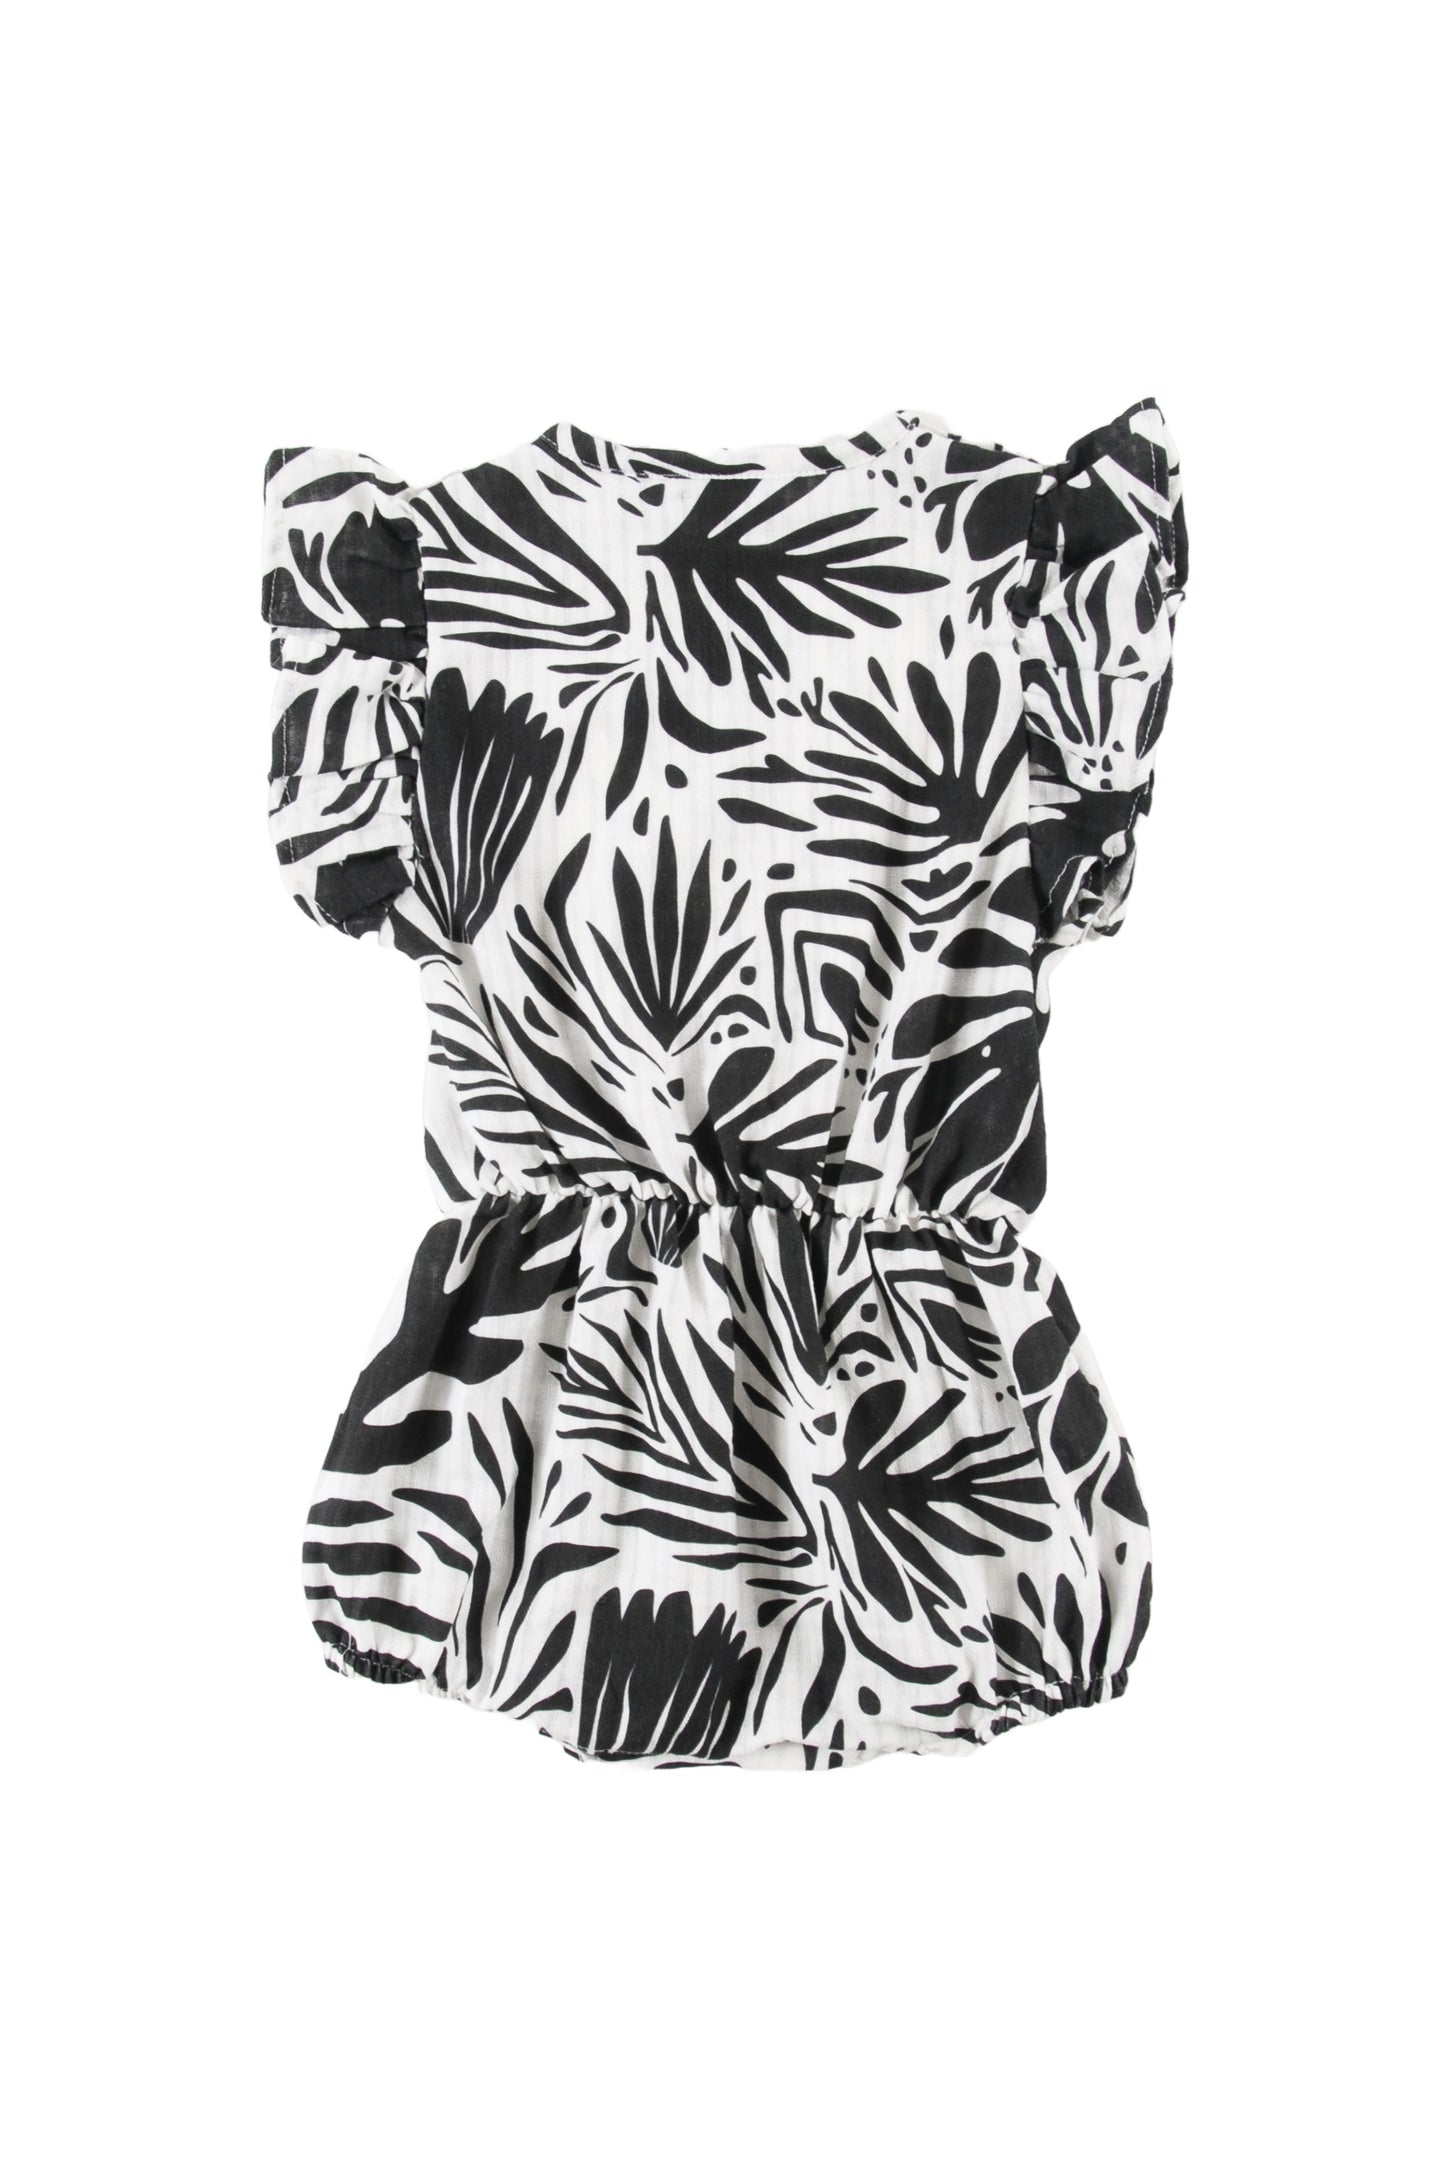 Loud Apparel Surf Floral Abstract Print Romper